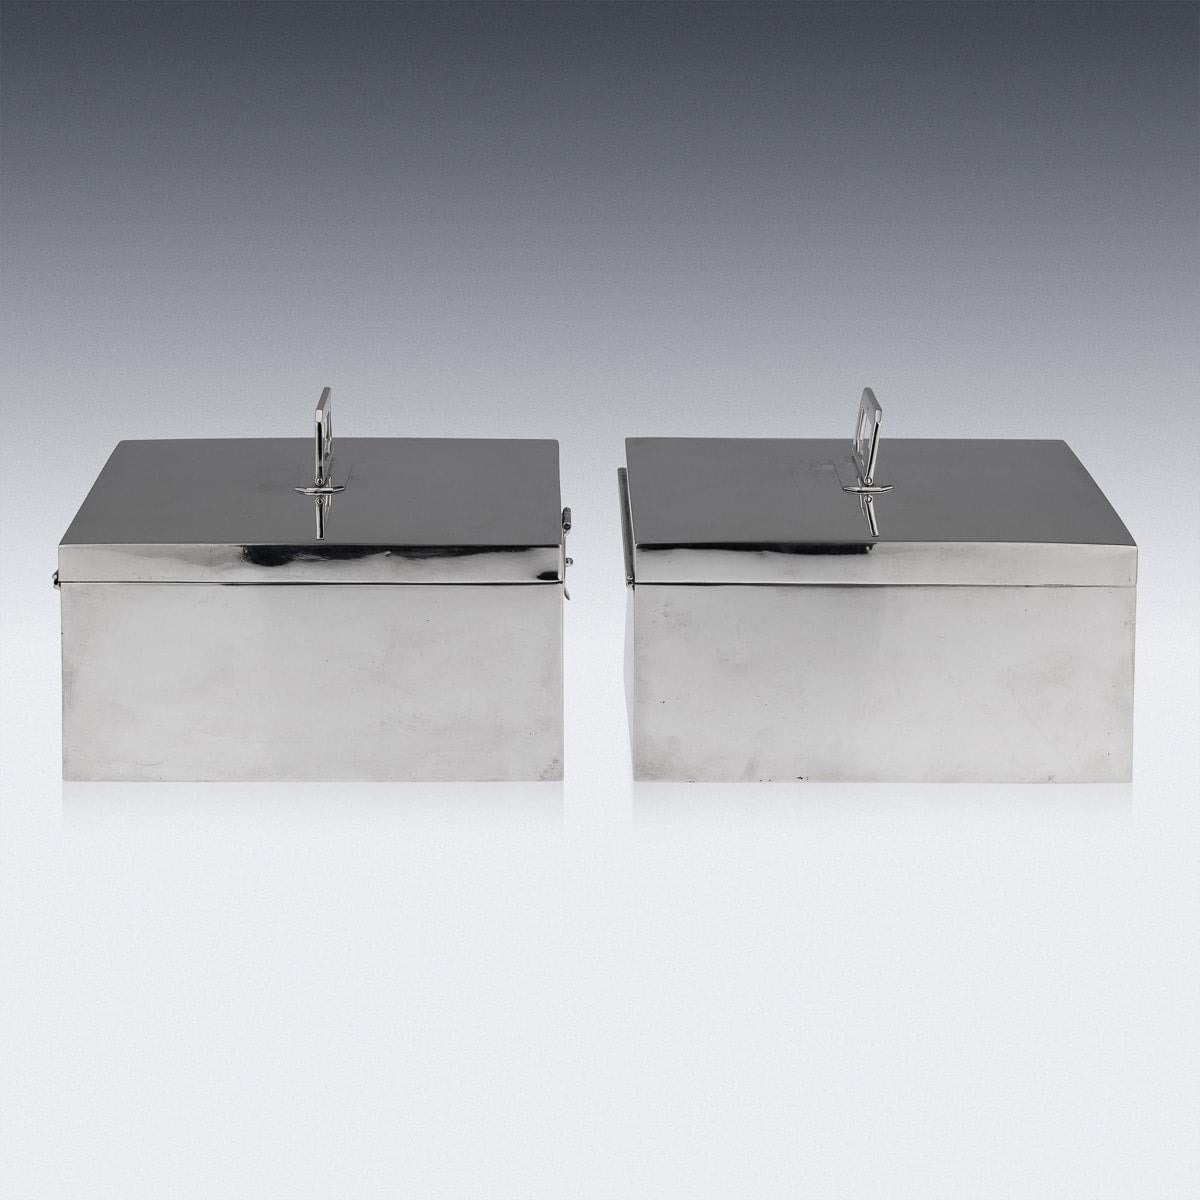 20th Century Art Deco Pair Of Solid Silver Cigar Boxes, Asprey & Co, c.1936 For Sale 2